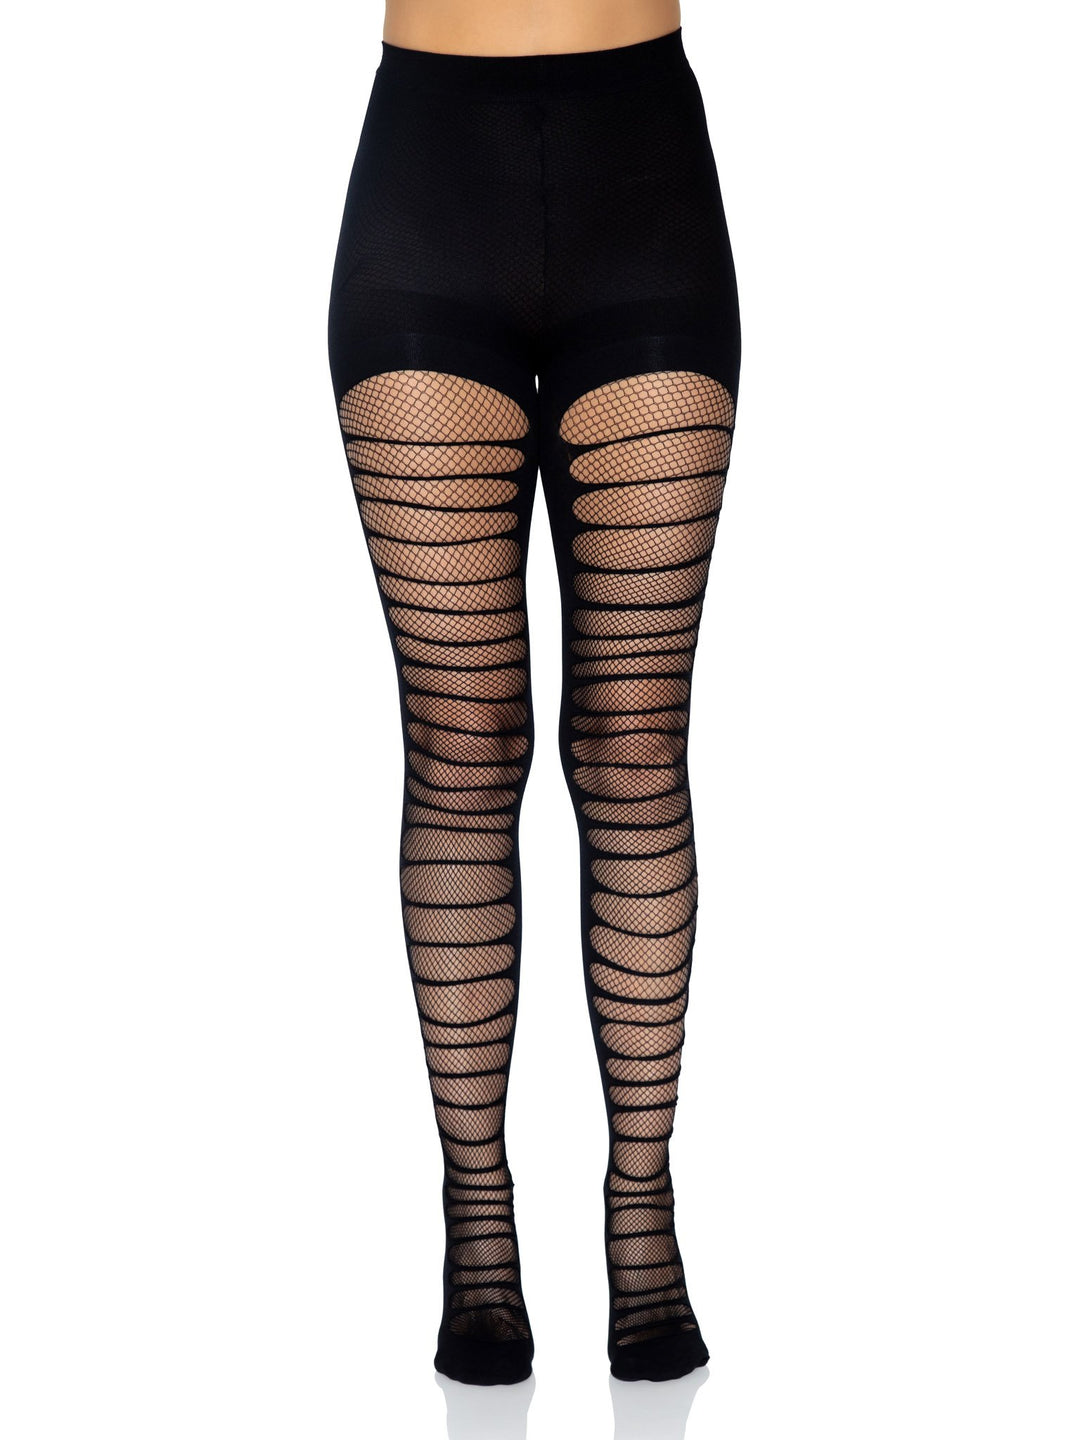 Double layer Fishnet Tights with Shredded Overlay